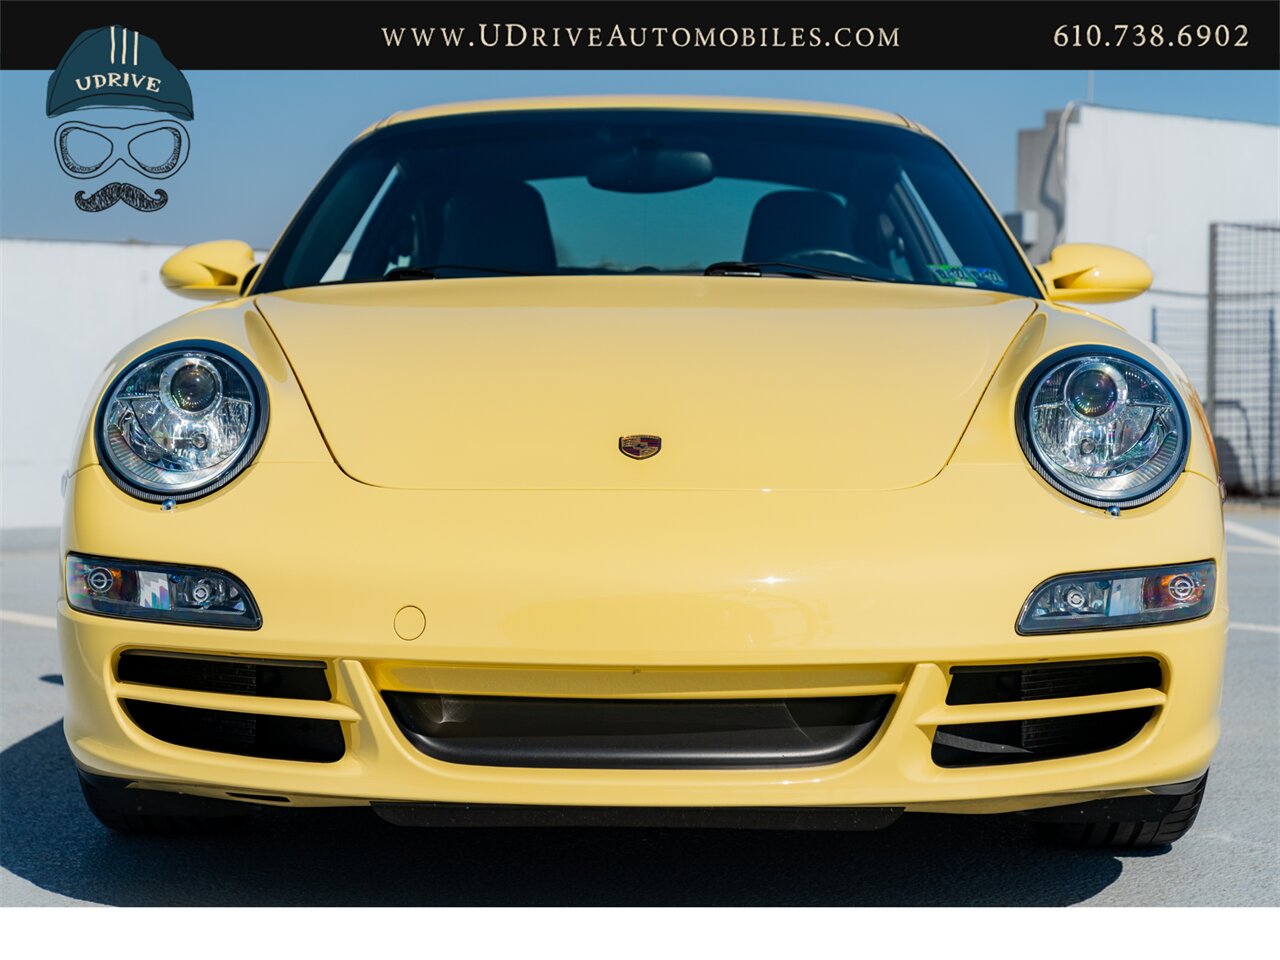 2007 Porsche 911 Carrera 4S 997 C4S Paint To Sample Pastel Yellow  6 Speed Sport Chrono Full Leather Yellow Gauges - Photo 12 - West Chester, PA 19382